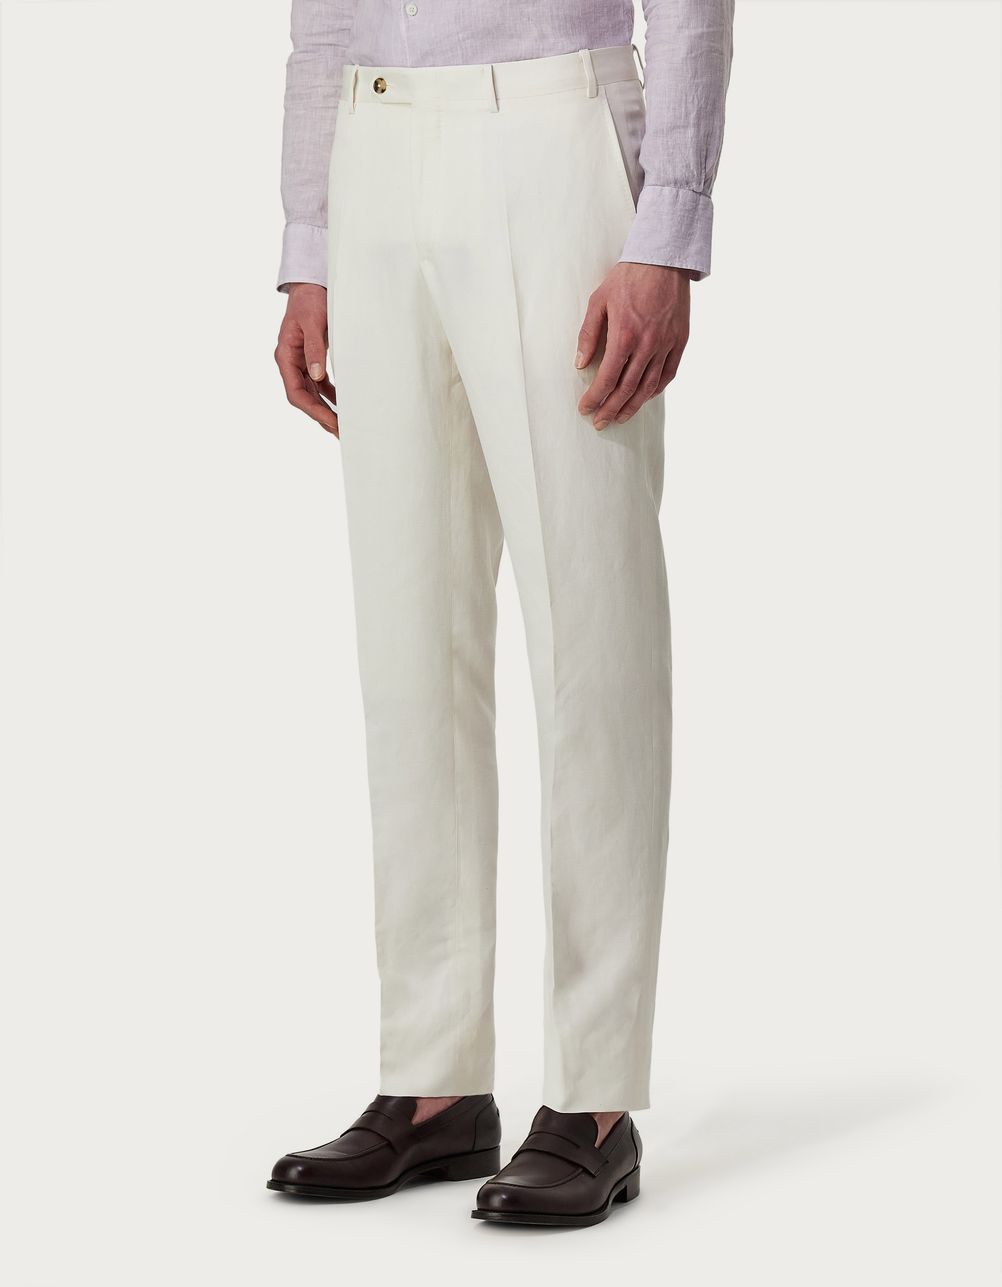 White trousers in silk and linen - Exclusive